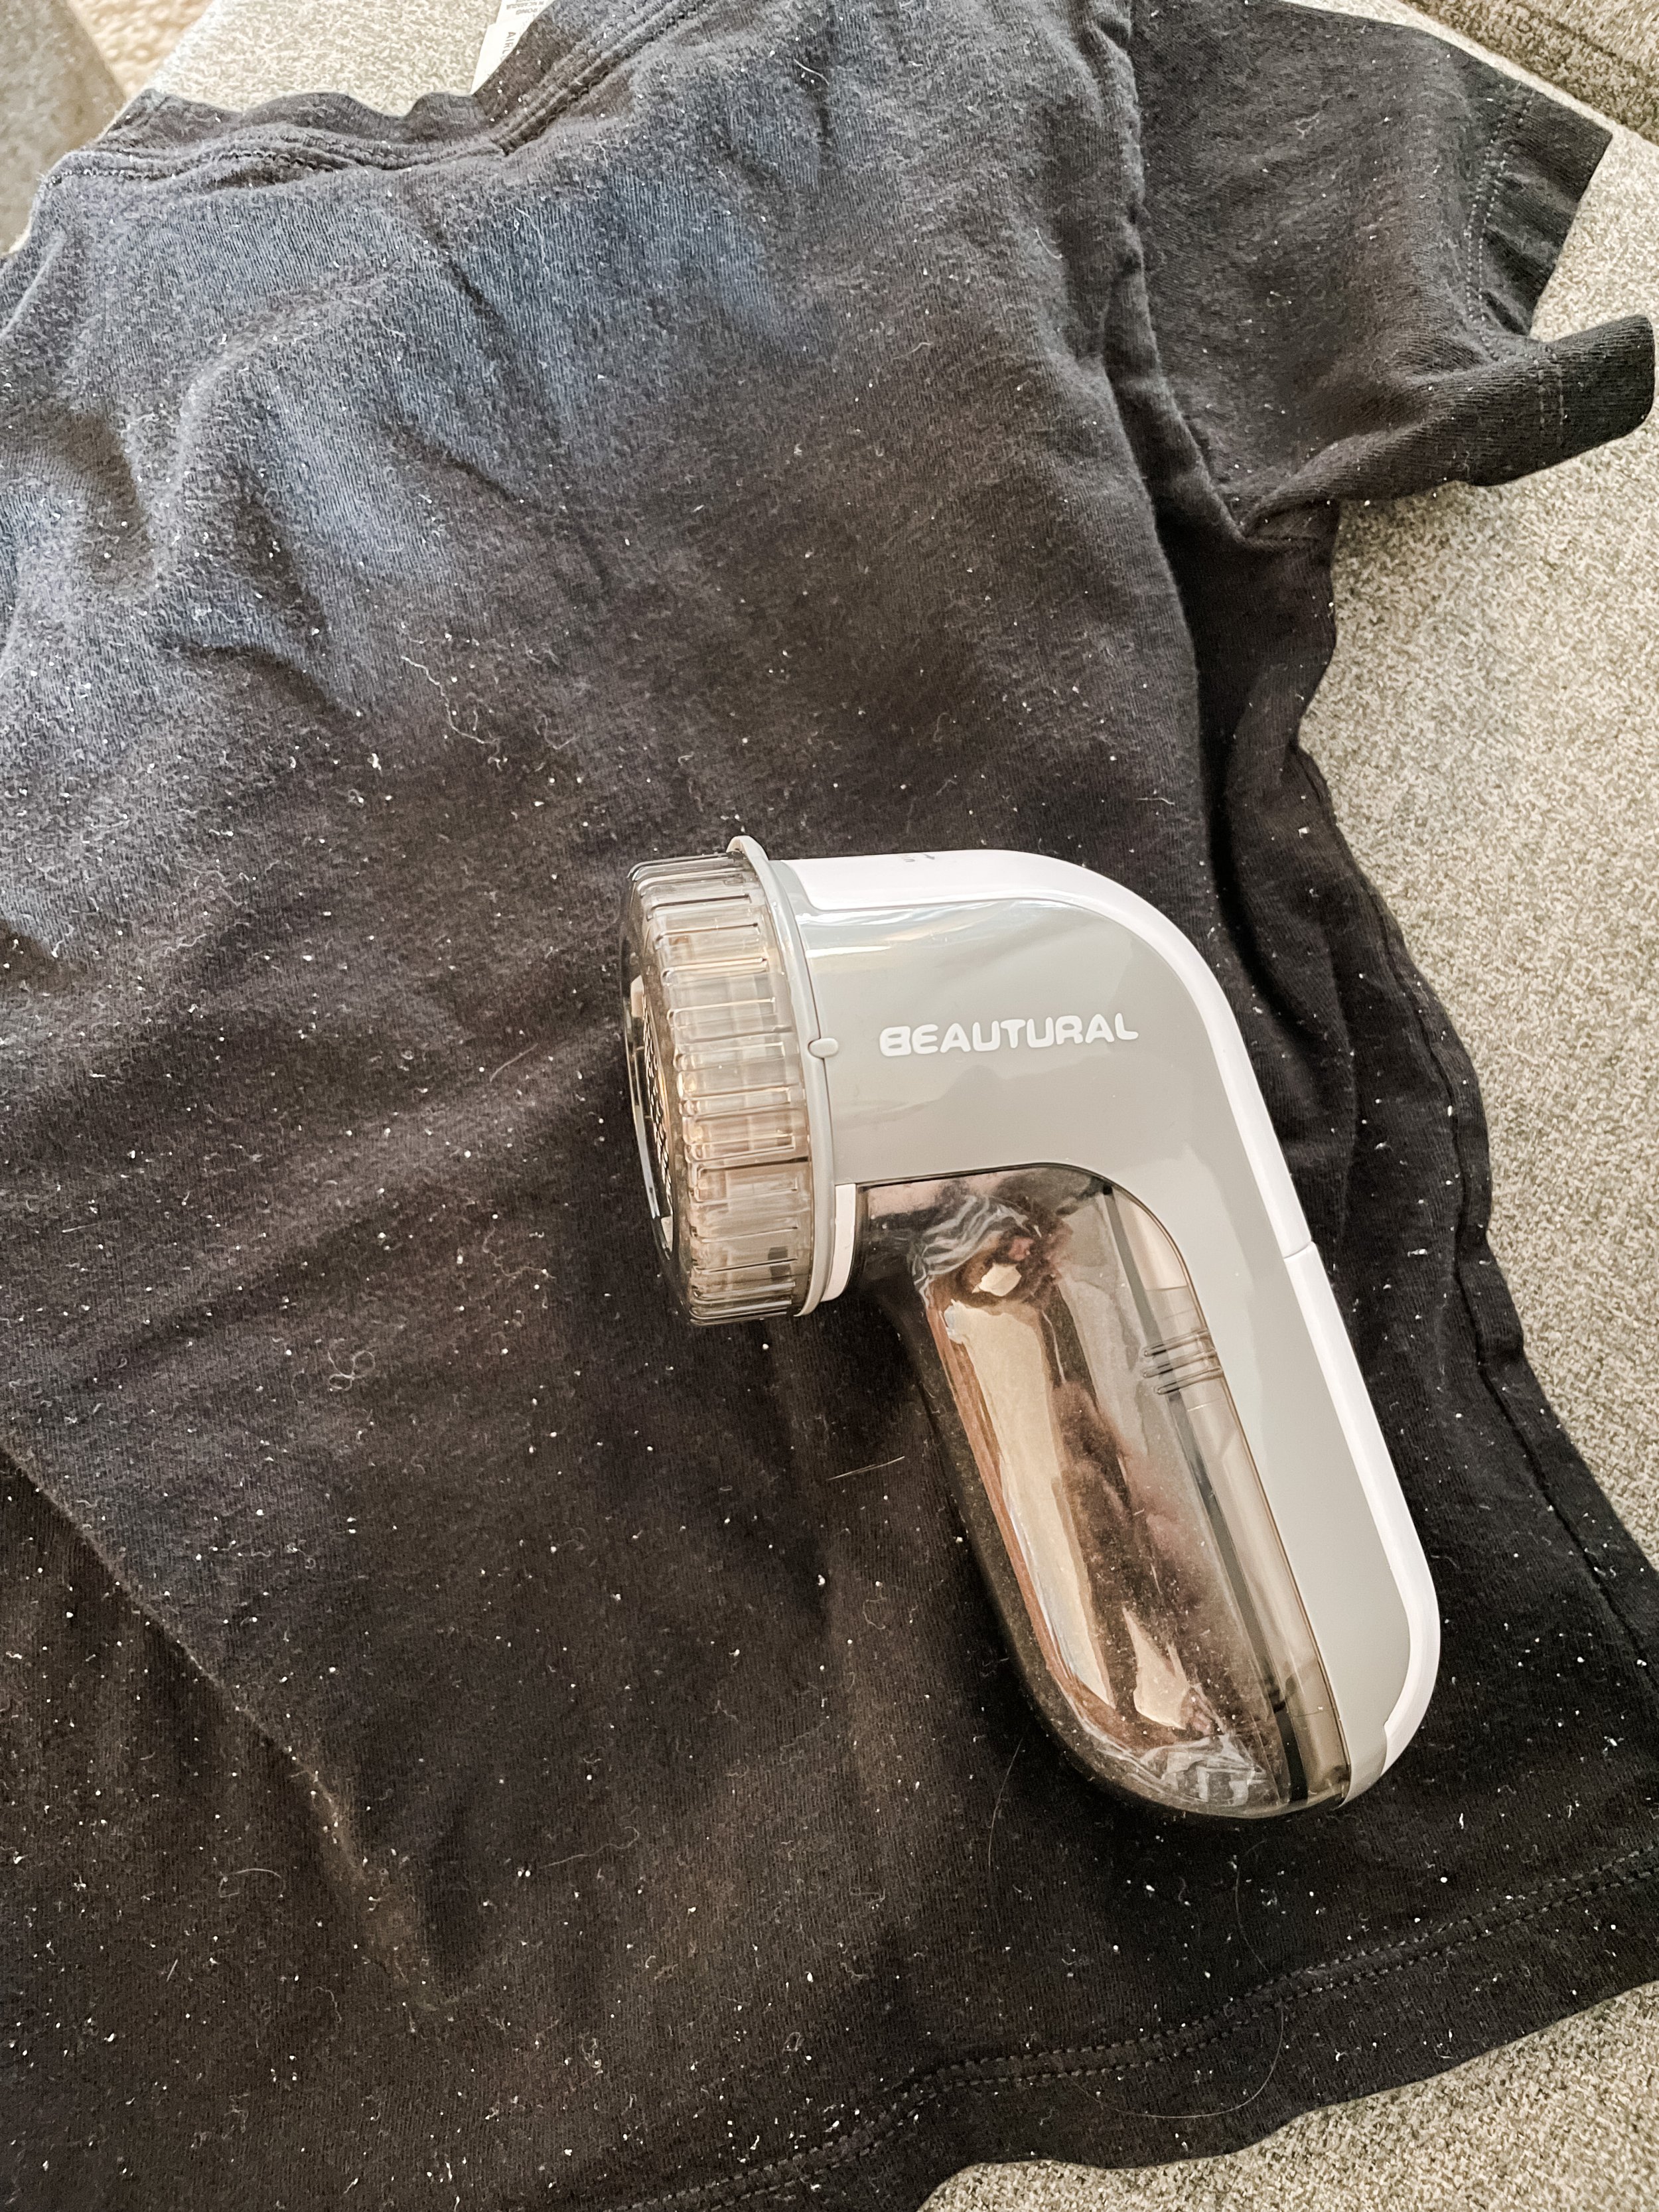 Fabric Shaver for the laundry lint